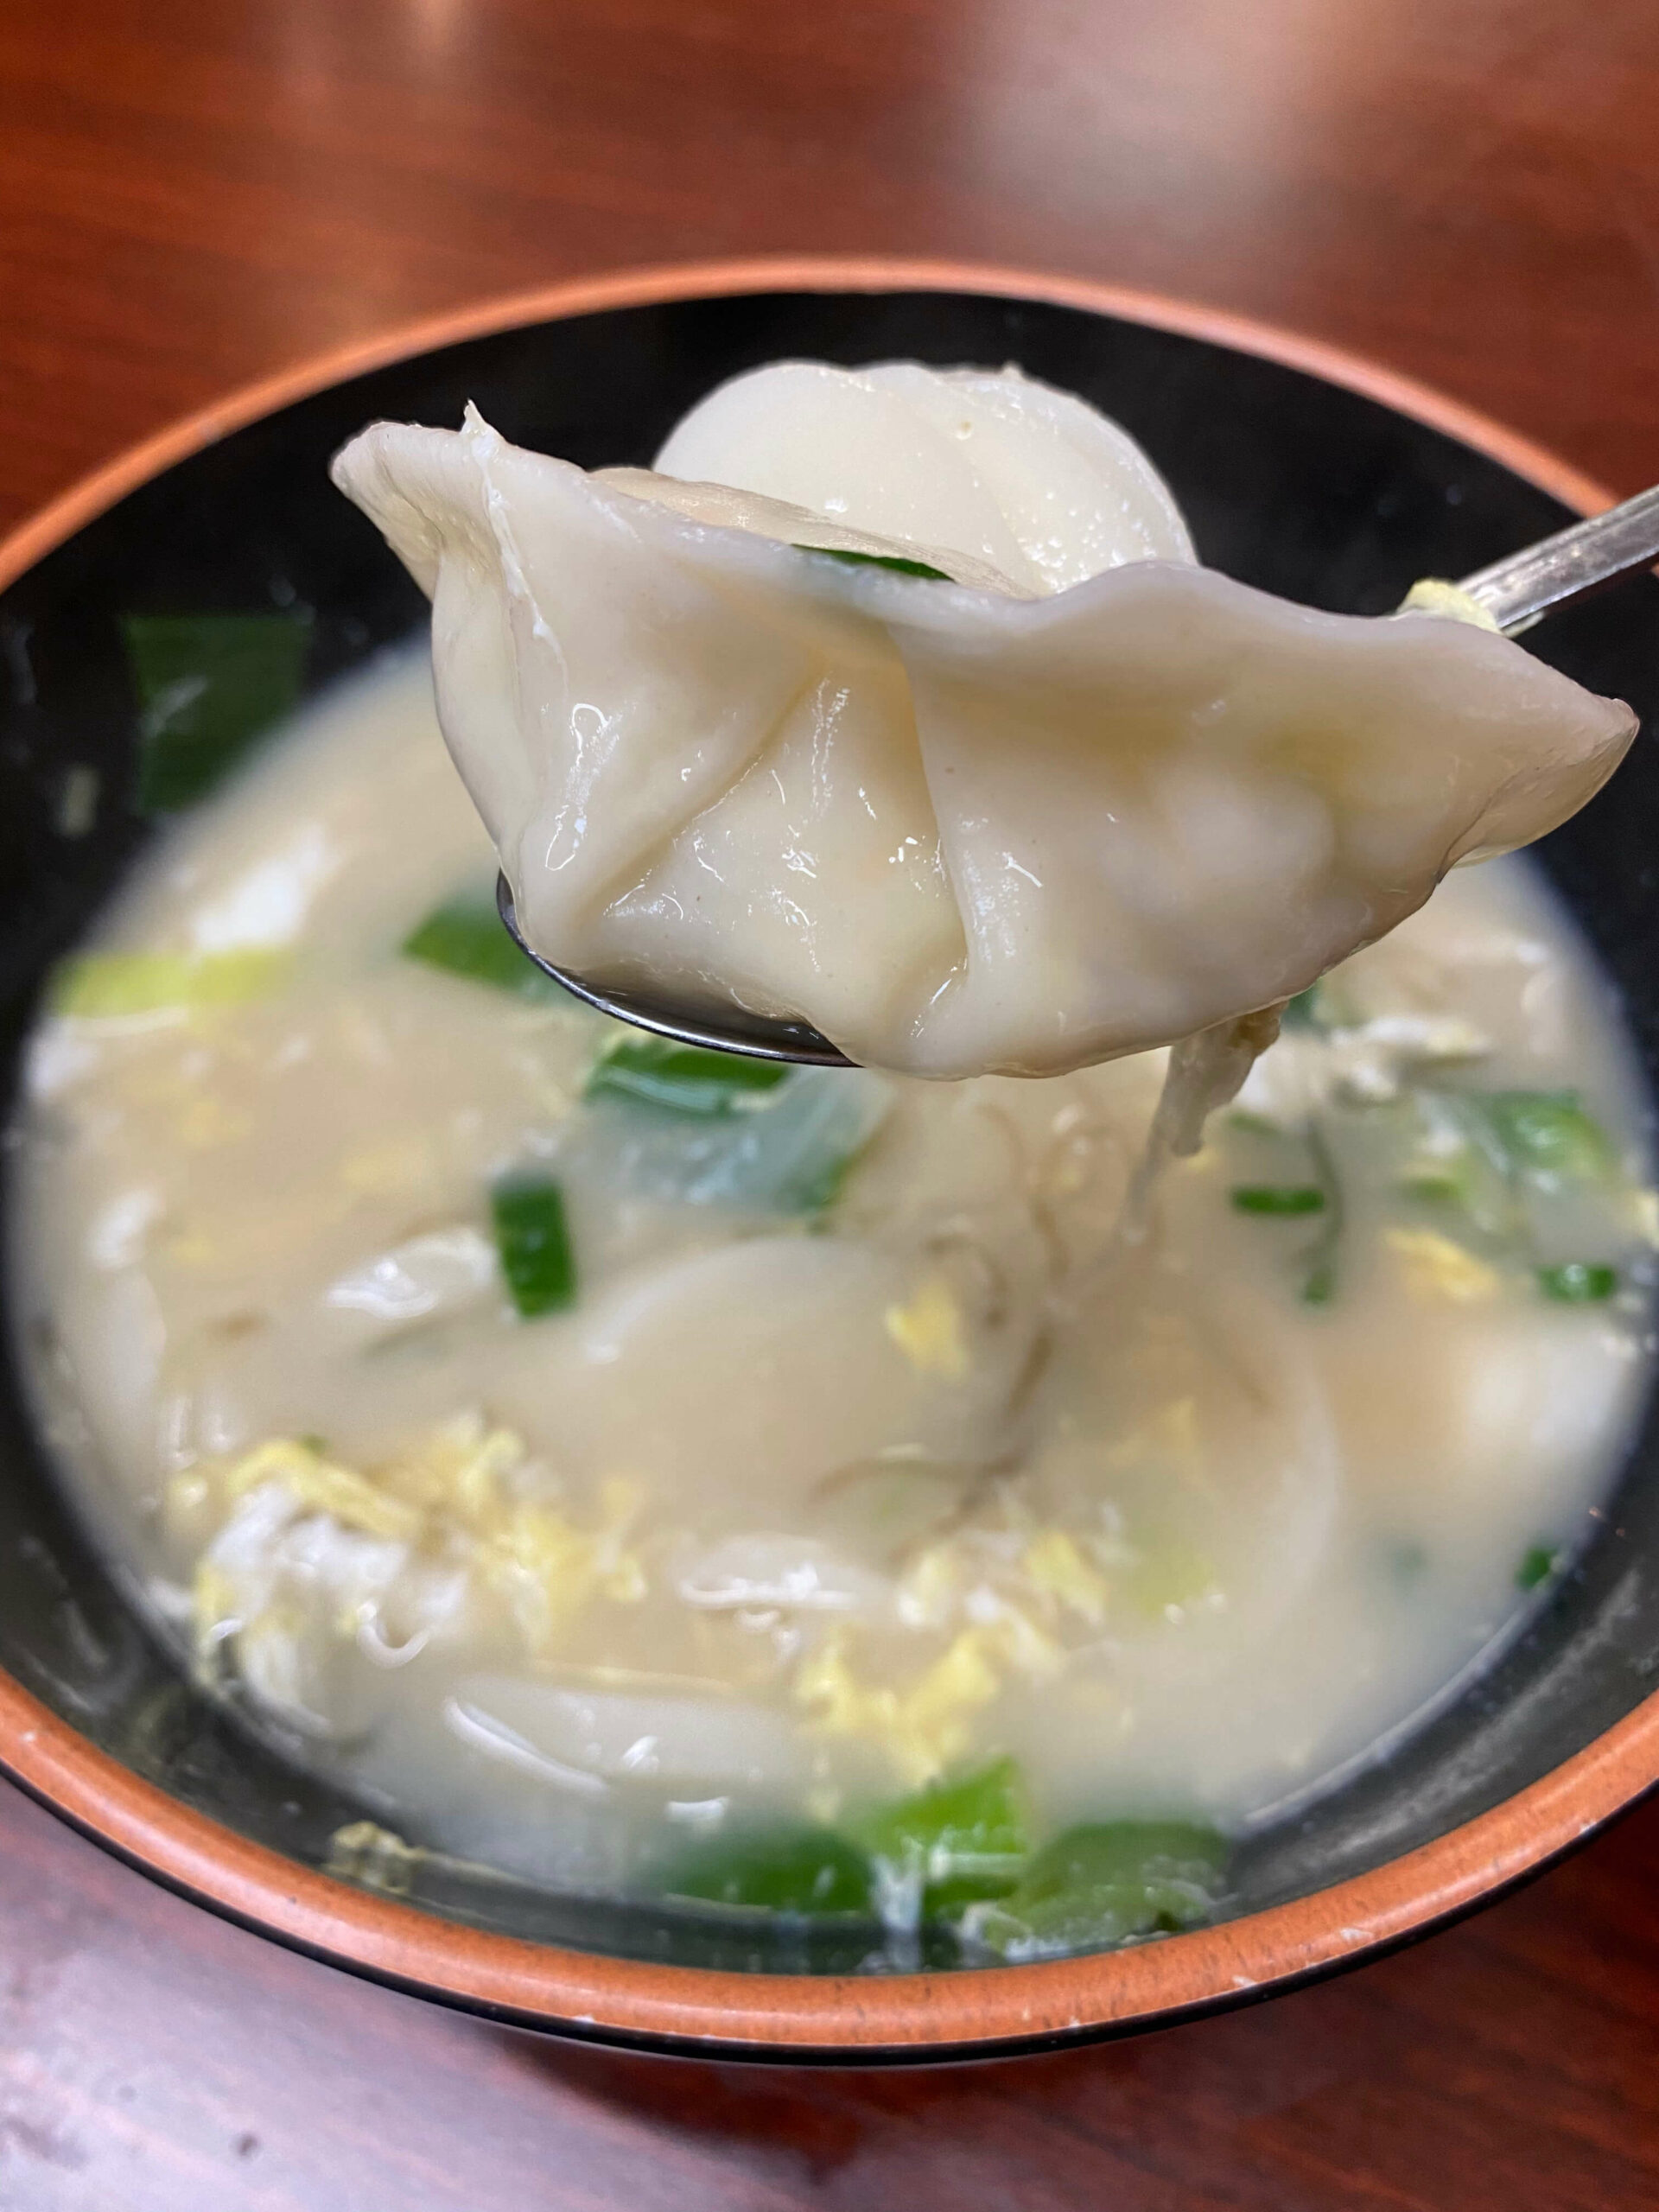 Kimchi Mama’s rice cake and dumpling soup with a dumpling on the spoon